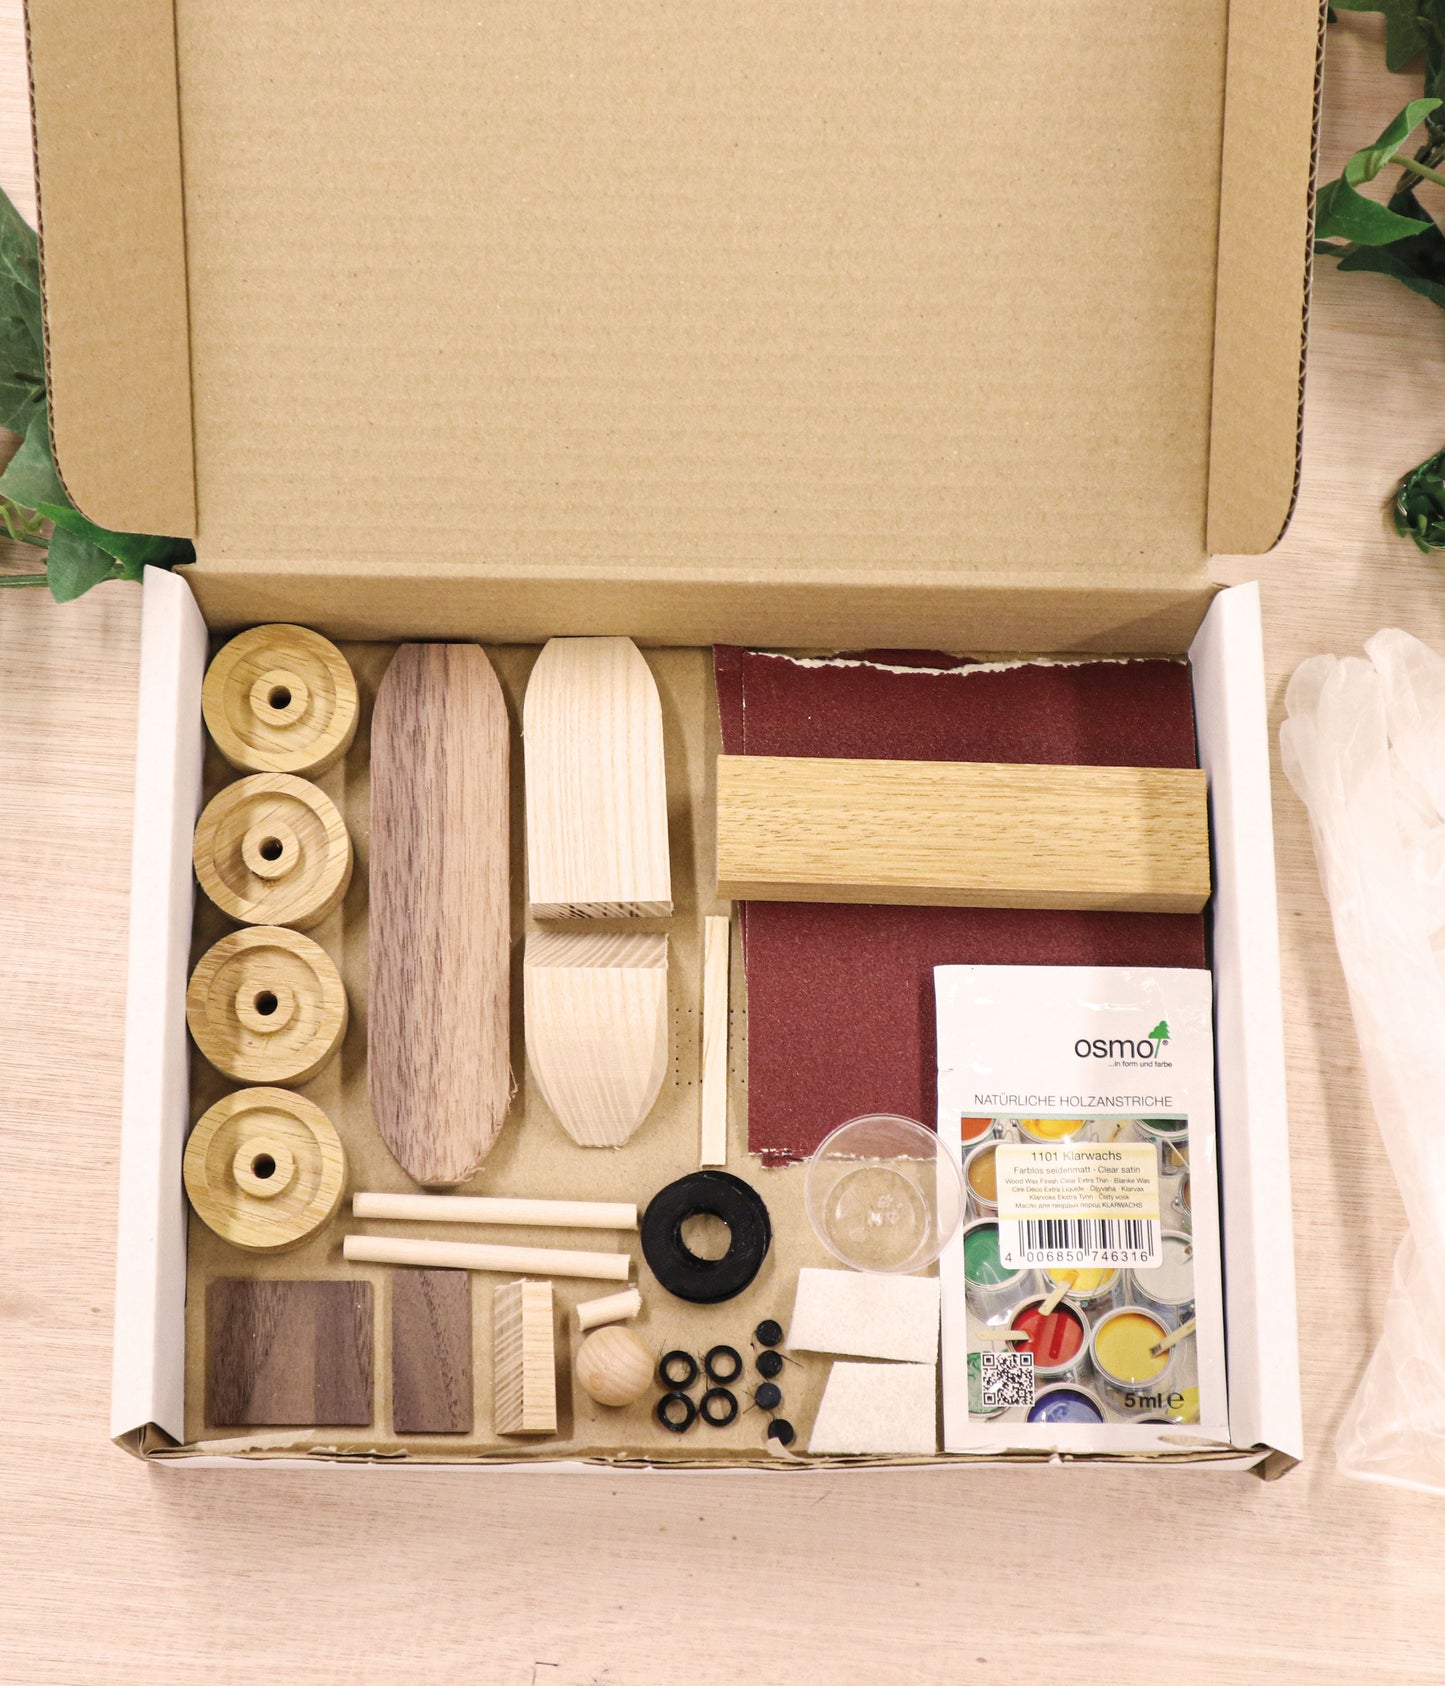 Stirling limited edition woodworking kit - what's inside the box - Ash & Co Workshops woodworking kits for kids and adults